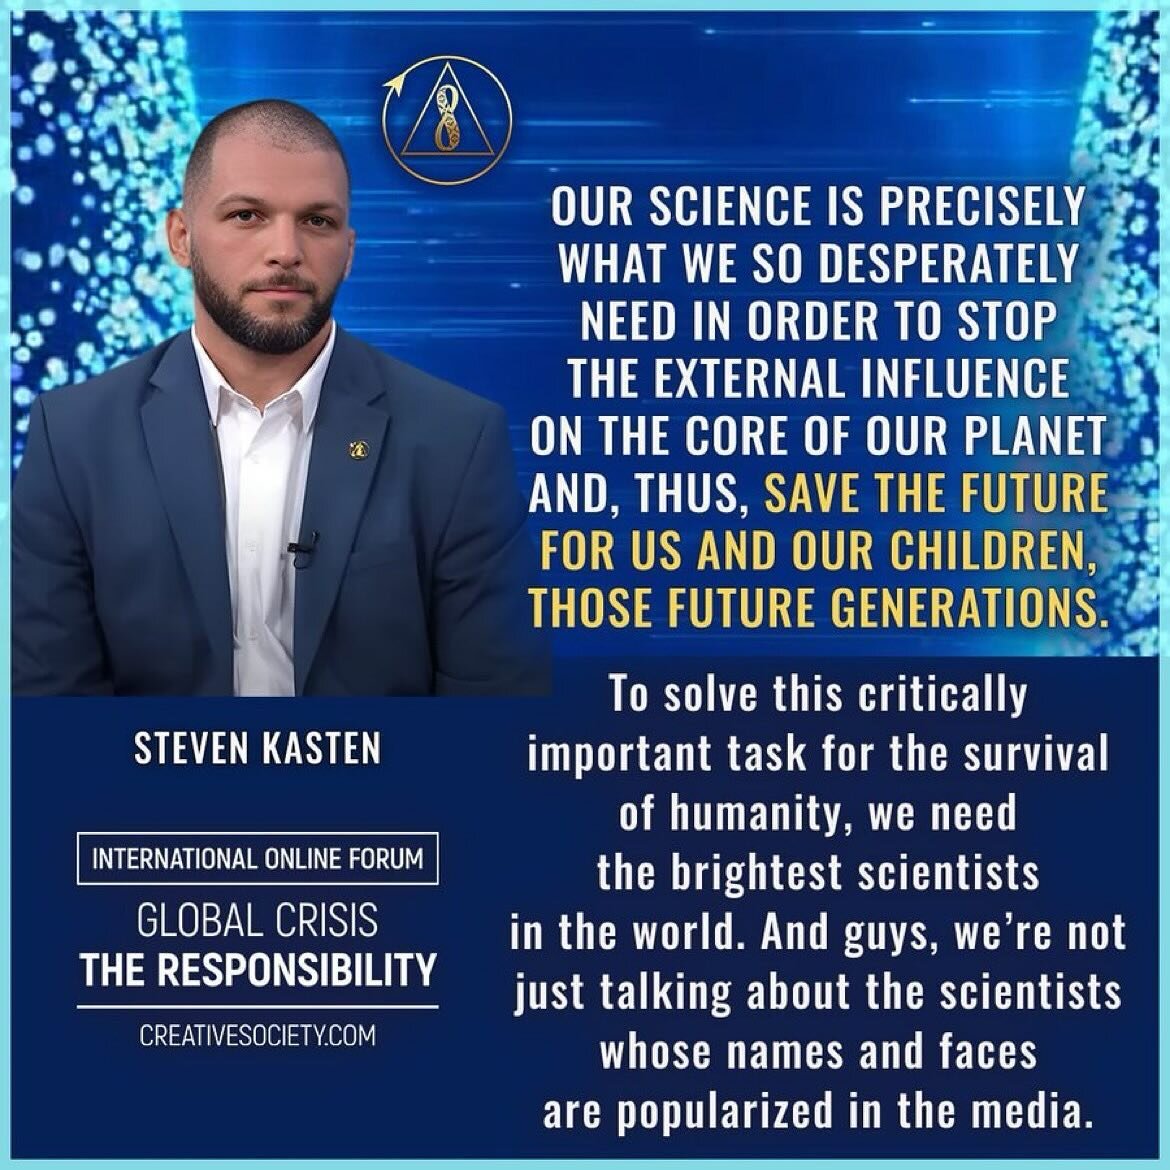 &ldquo;Our SCIENCE is precisely what we so desperately need in order to stop the external influence on the core of our planet and, thus, save the future for us and our children, those future generations. 

To solve this critically important task for 